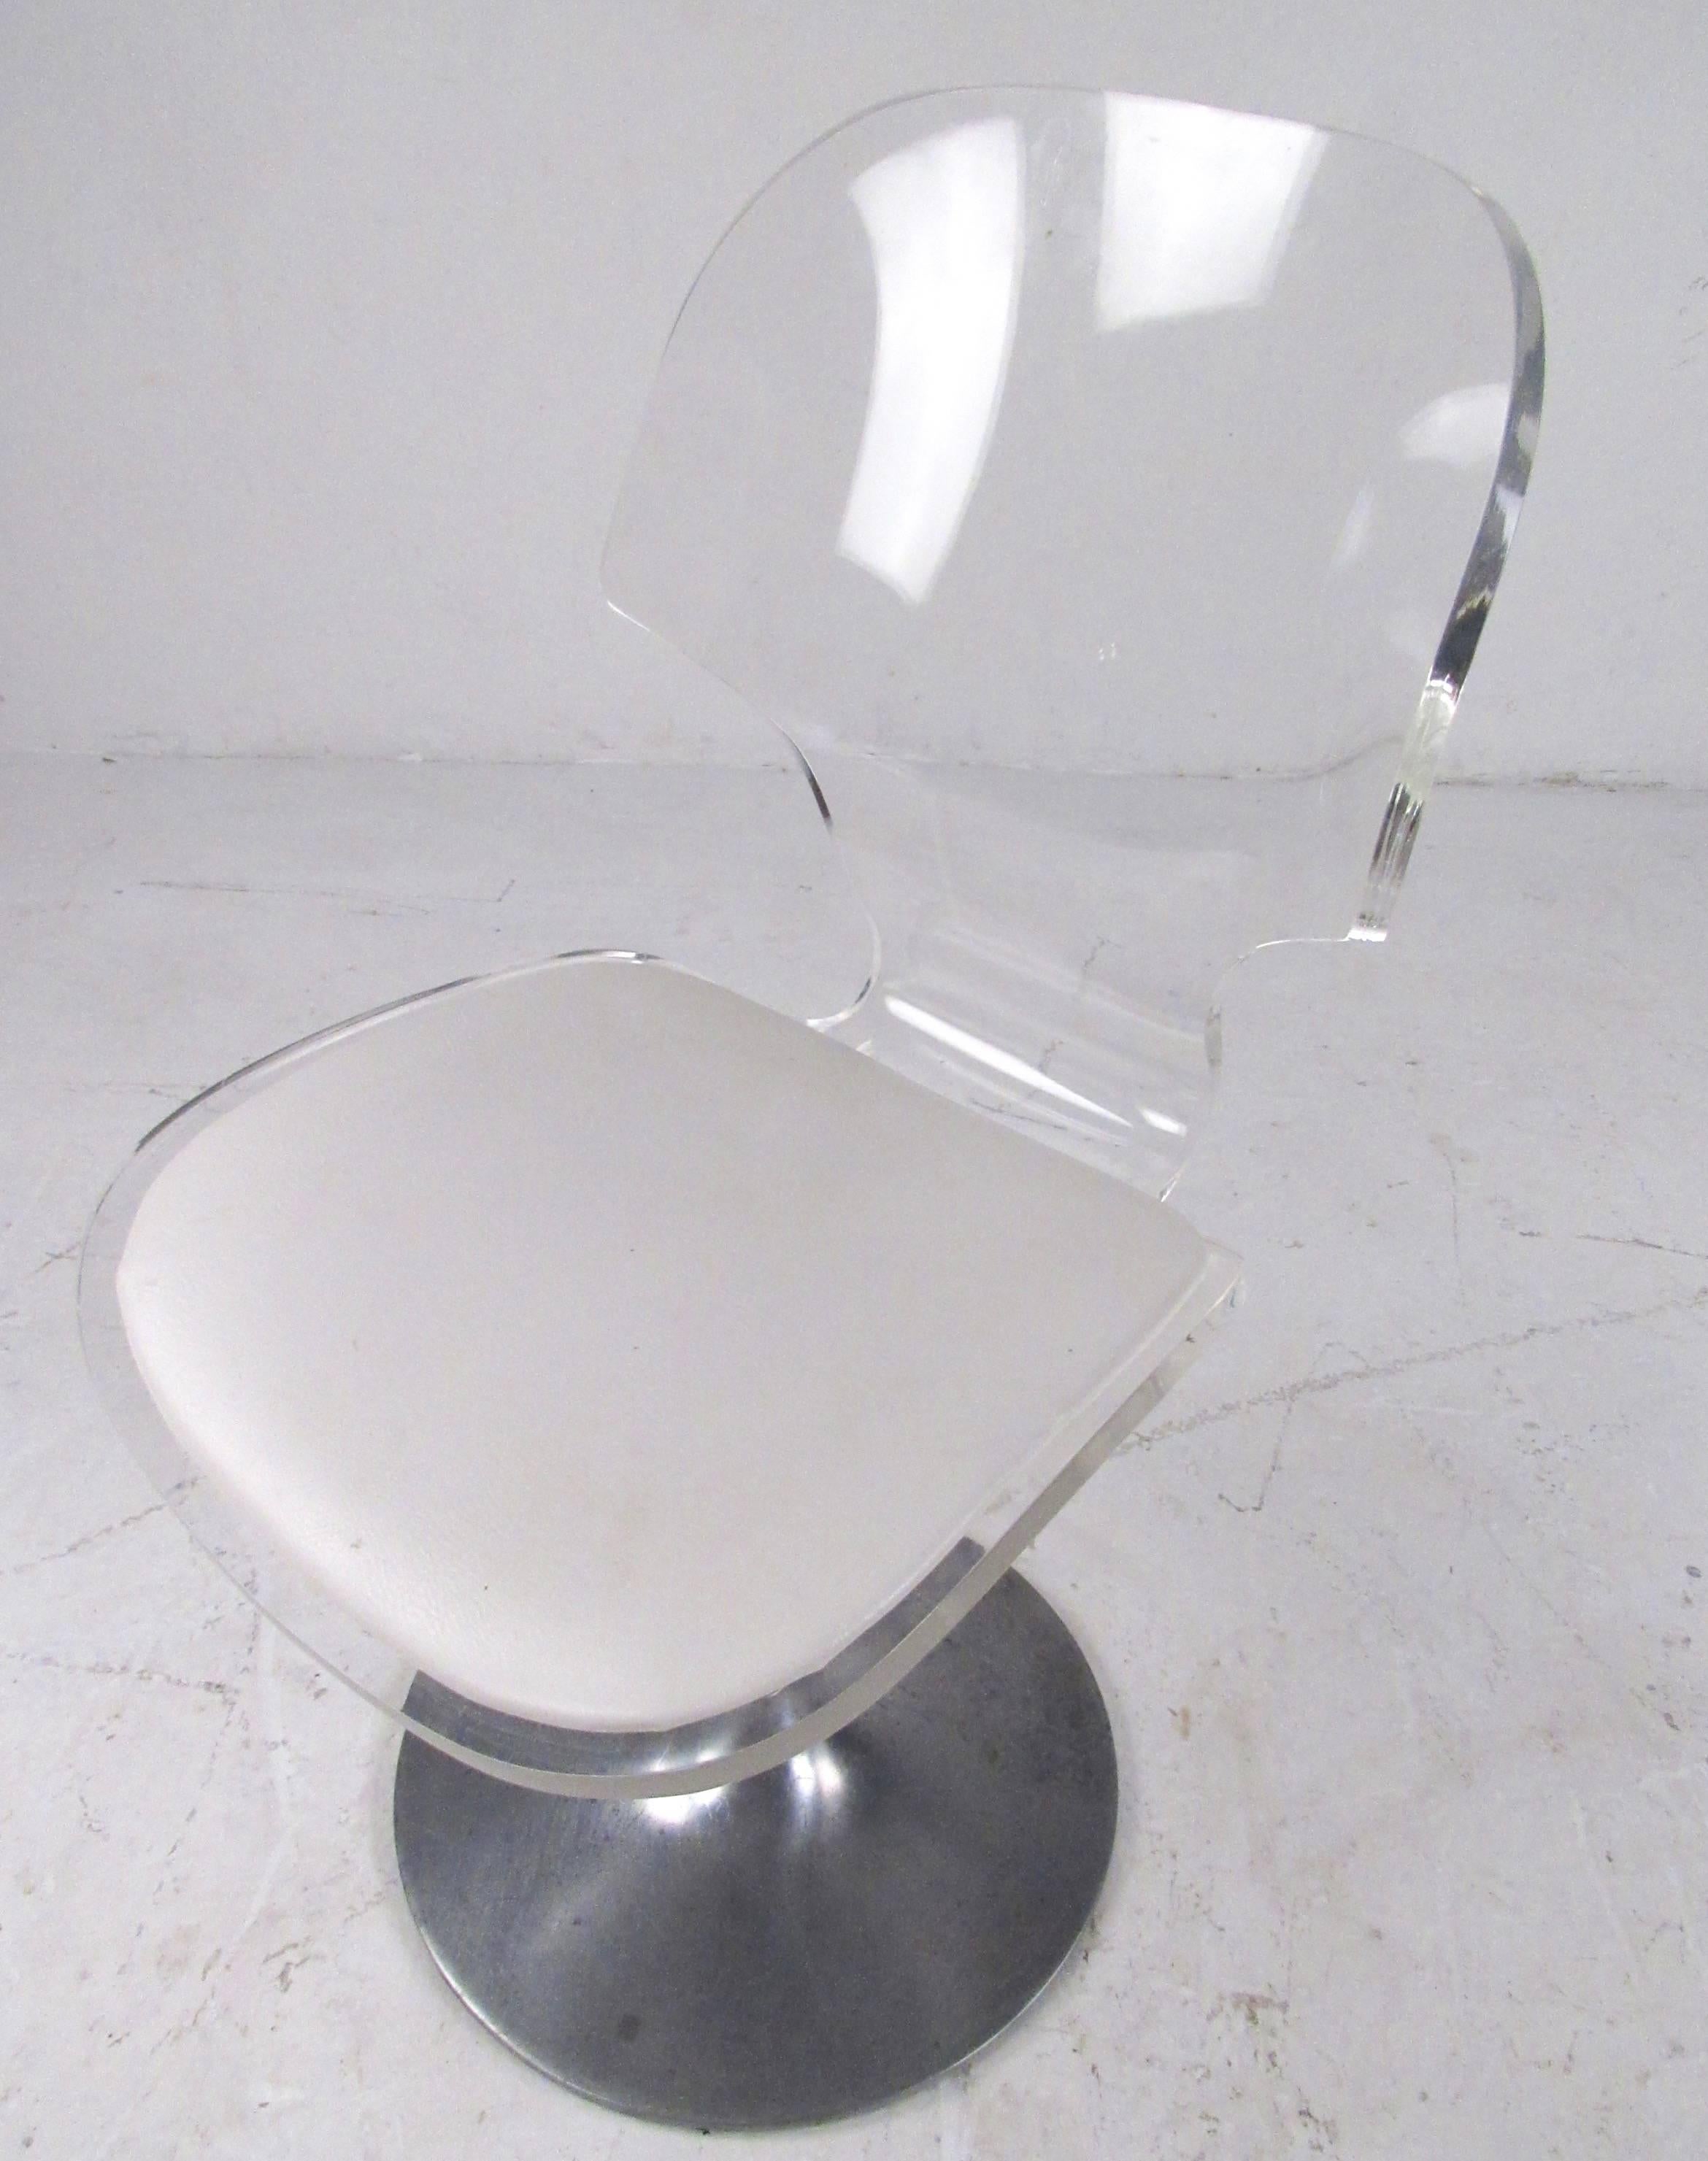 This Mid-Century Modern swivel side chair features Lucite frame with vinyl seat and unique aluminium tulip style base. The vintage design of the chair makes a simple yet elegant addition to home or business seating. Please confirm item location (NY